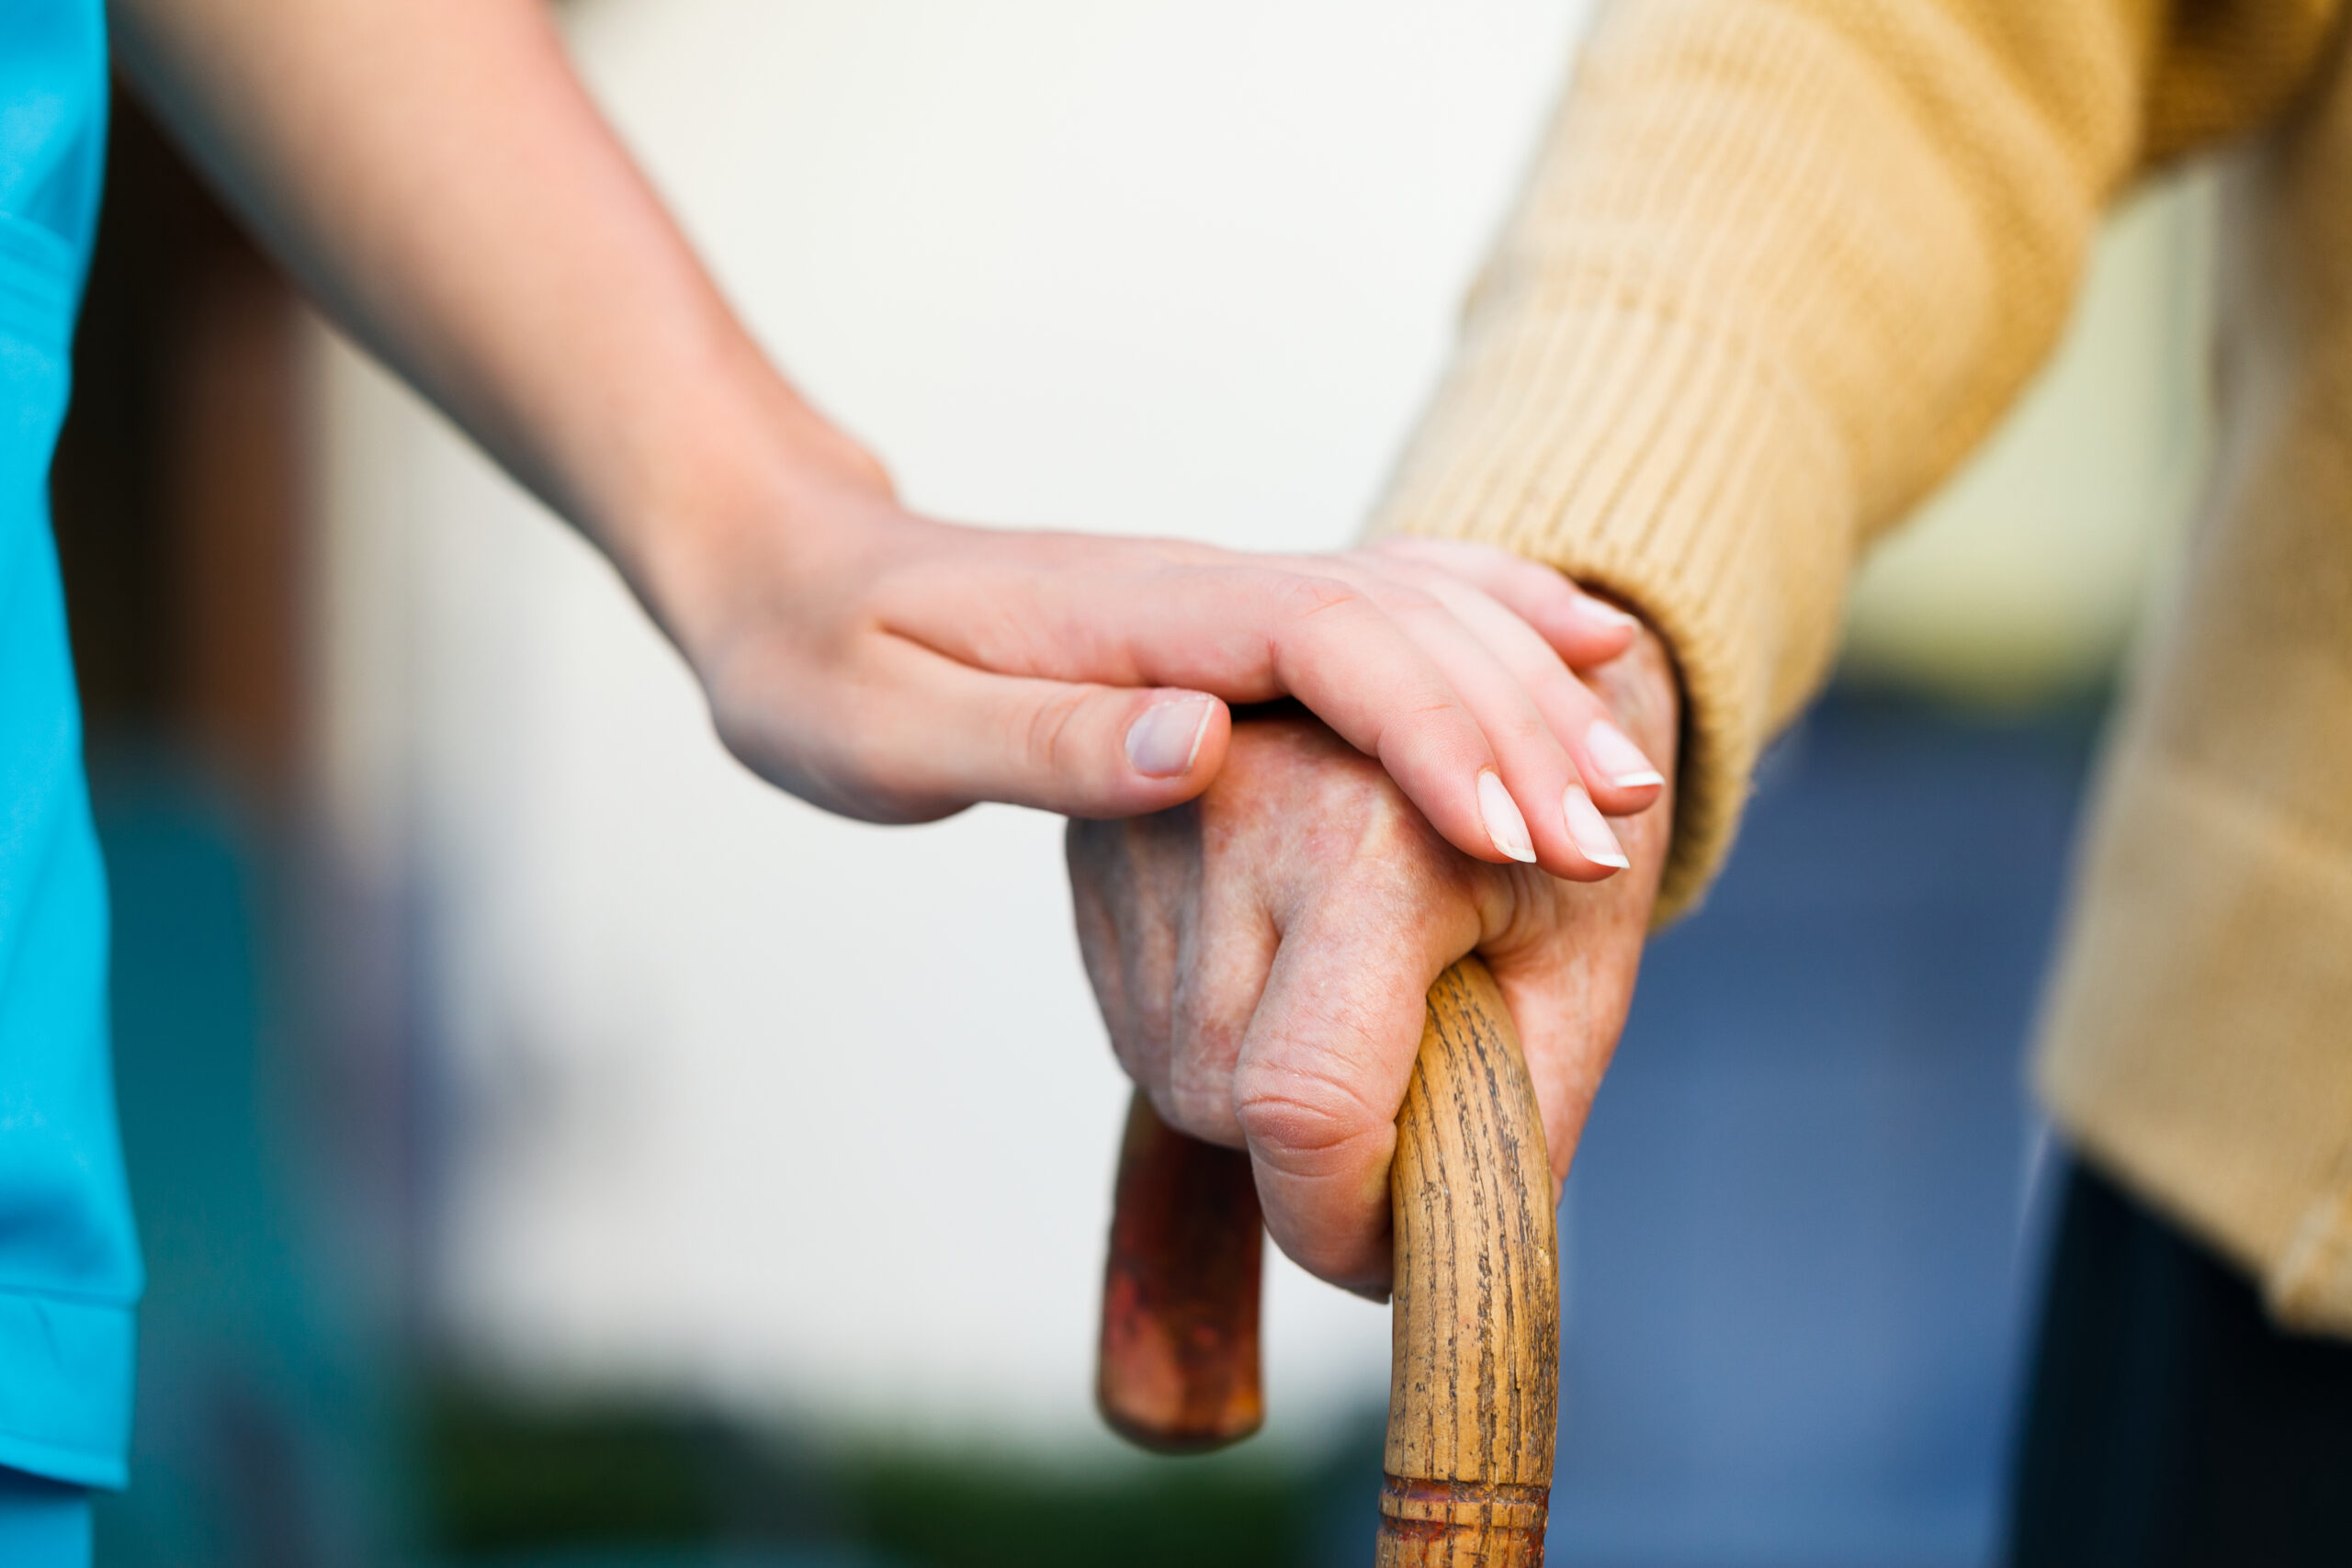 Young caregiver holding an elderly person's hand on a cane for support and stability.